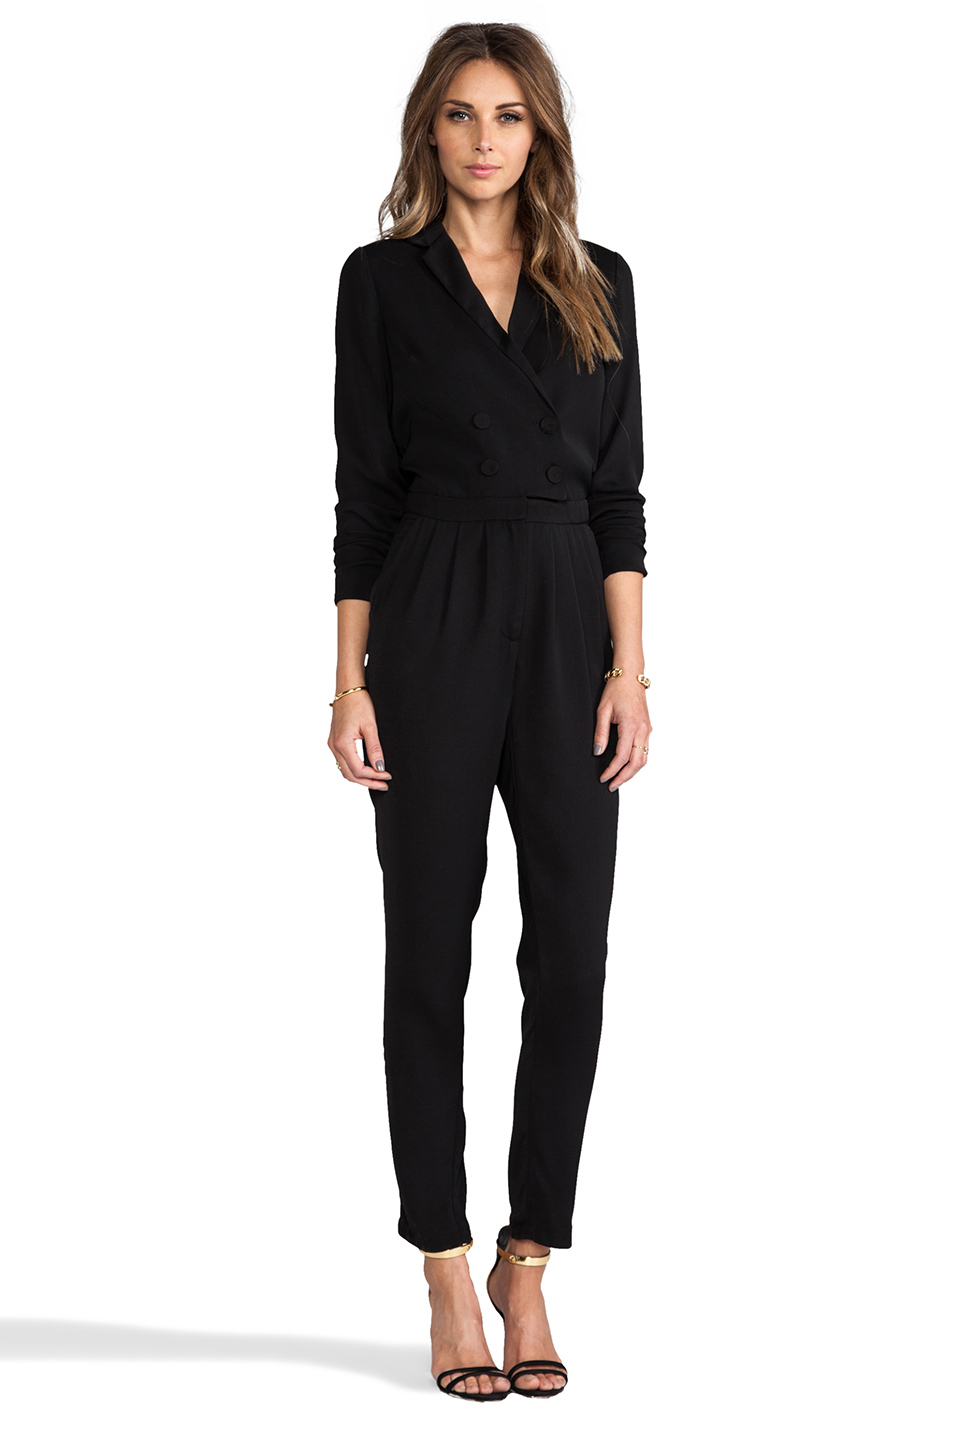 Lyst - Line & Dot Double Breasted Jumpsuit in Black in Black